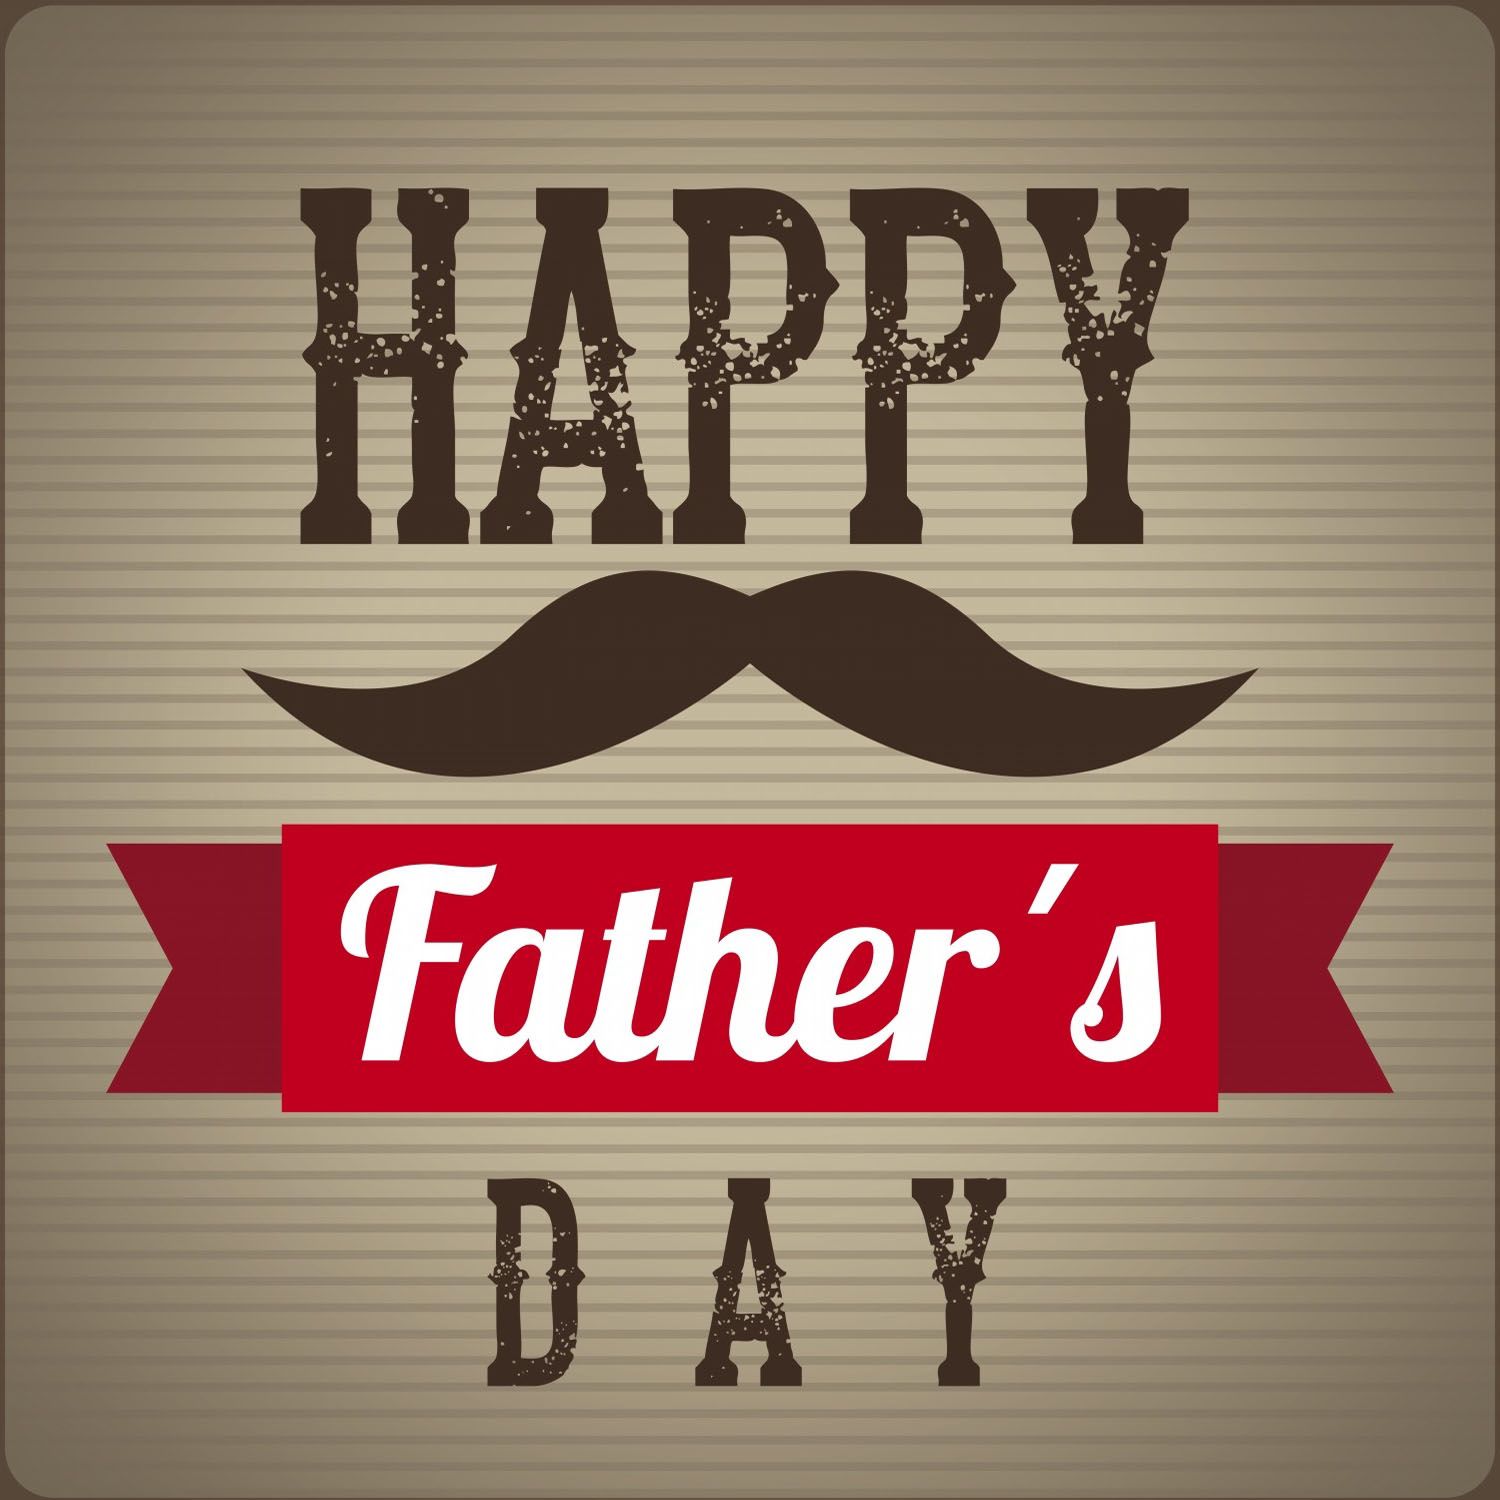 Happy Father's Day 2020 Image, Quotes, Wishes, Greetings, Cards